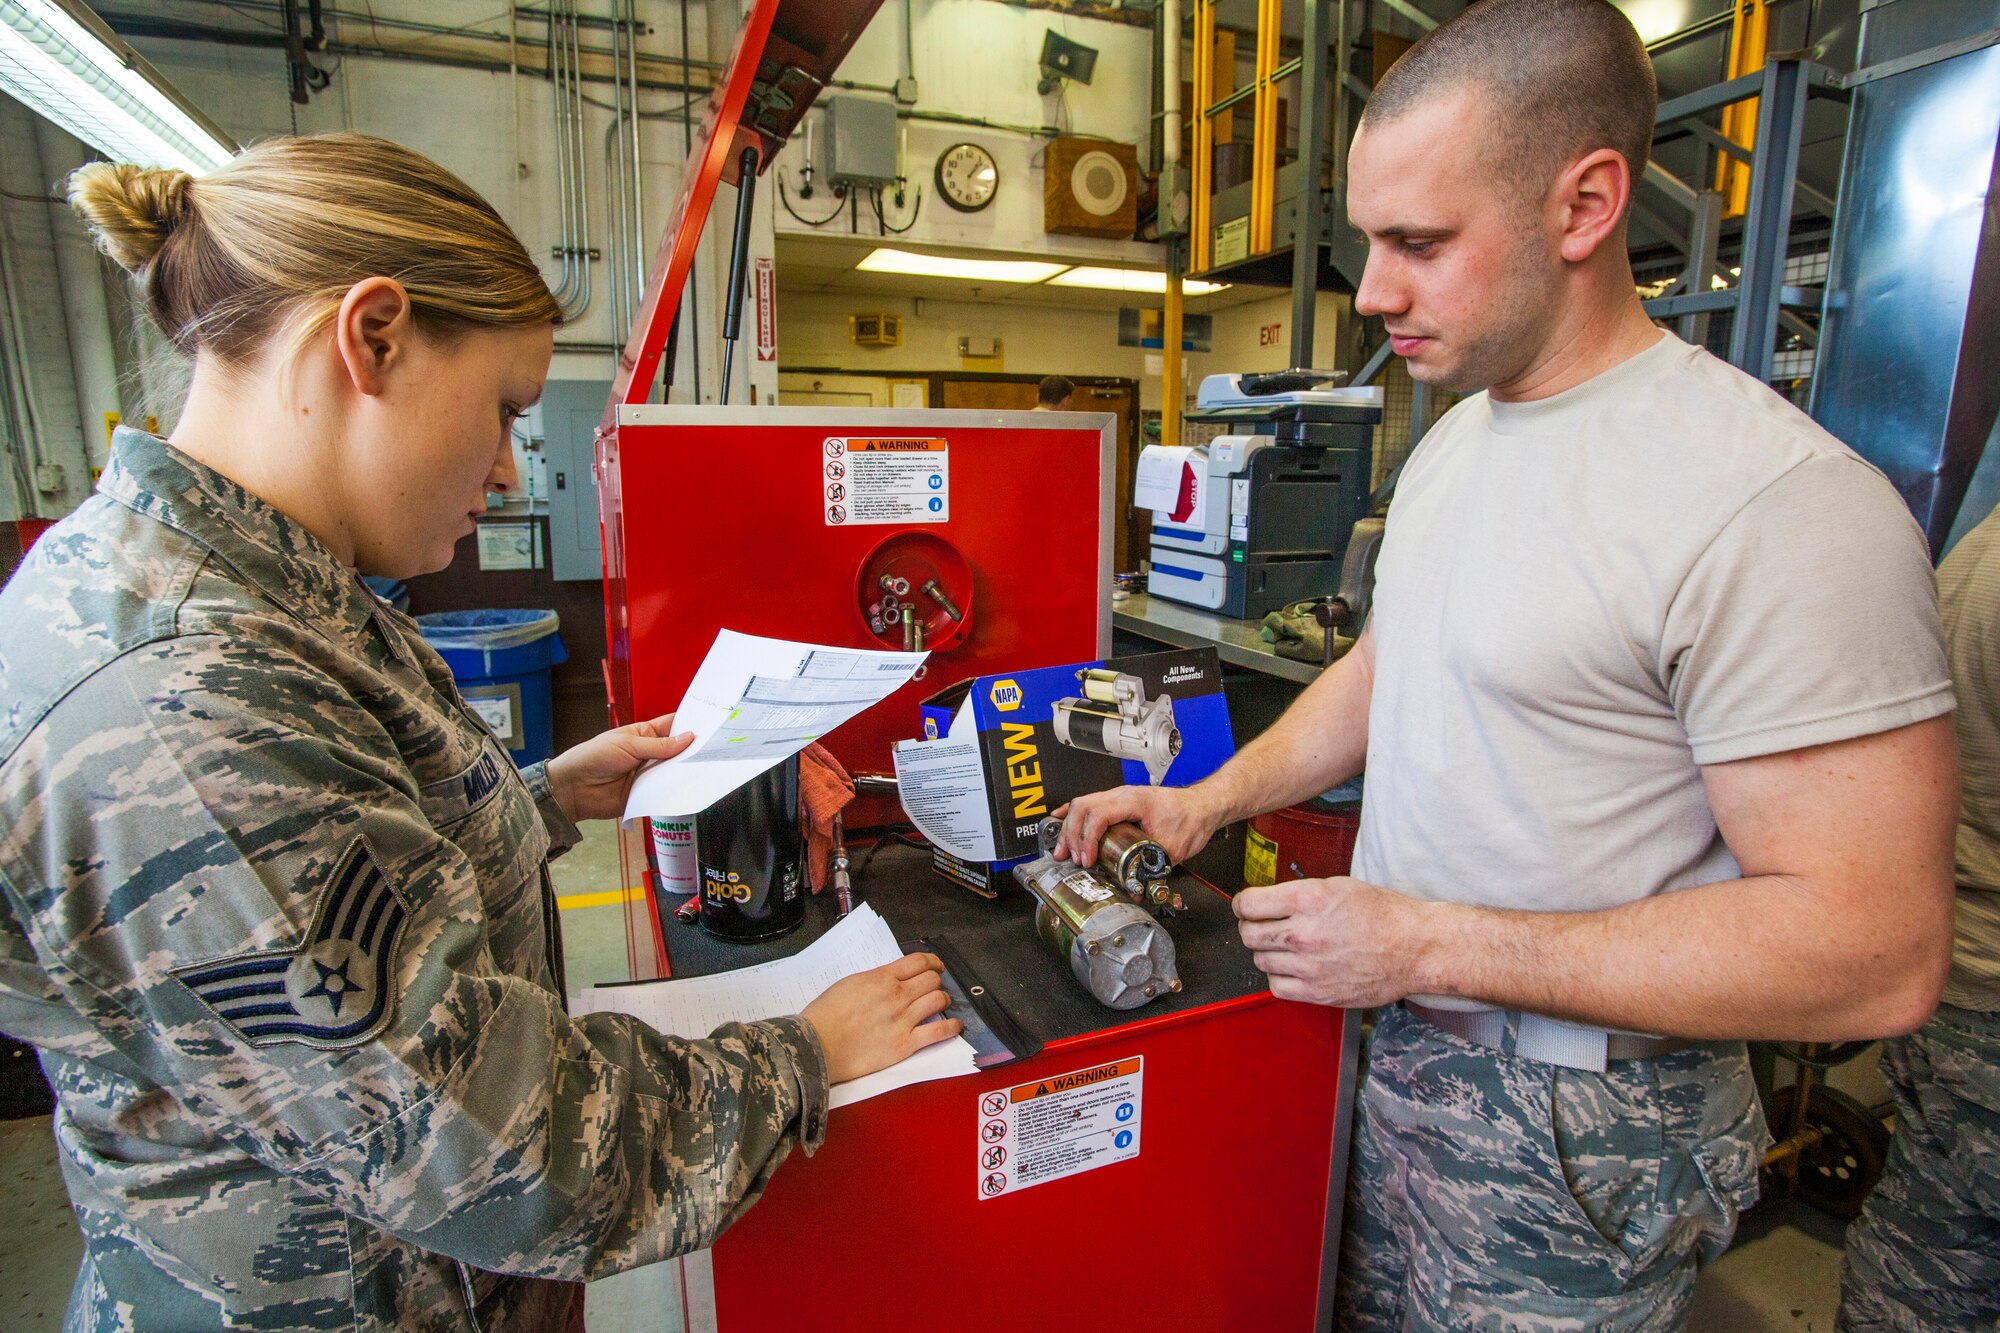 Senior Airman Keith Miller, right, describes to Staff Sgt. Danielle Miller what broke on the starter for a six-passenger pickup truck at the 108th Wing Vehicle Maintenance Shop at Joint Base McGuire-Dix-Lakehurst, N.J., Jan. 11, 2015. Staff Sgt. Miller is a vehicle management and analysis technician with the 108th Vehicle Management Section, while Senior Airman Miller is a general purpose mechanic with the 108th Vehicle Maintenance Shop. Vehicle maintenance is part of the 108th Logistics Readiness Squadron, New Jersey Air National Guard. (U.S. Air National Guard photo by Master Sgt. Mark C. Olsen/Released)